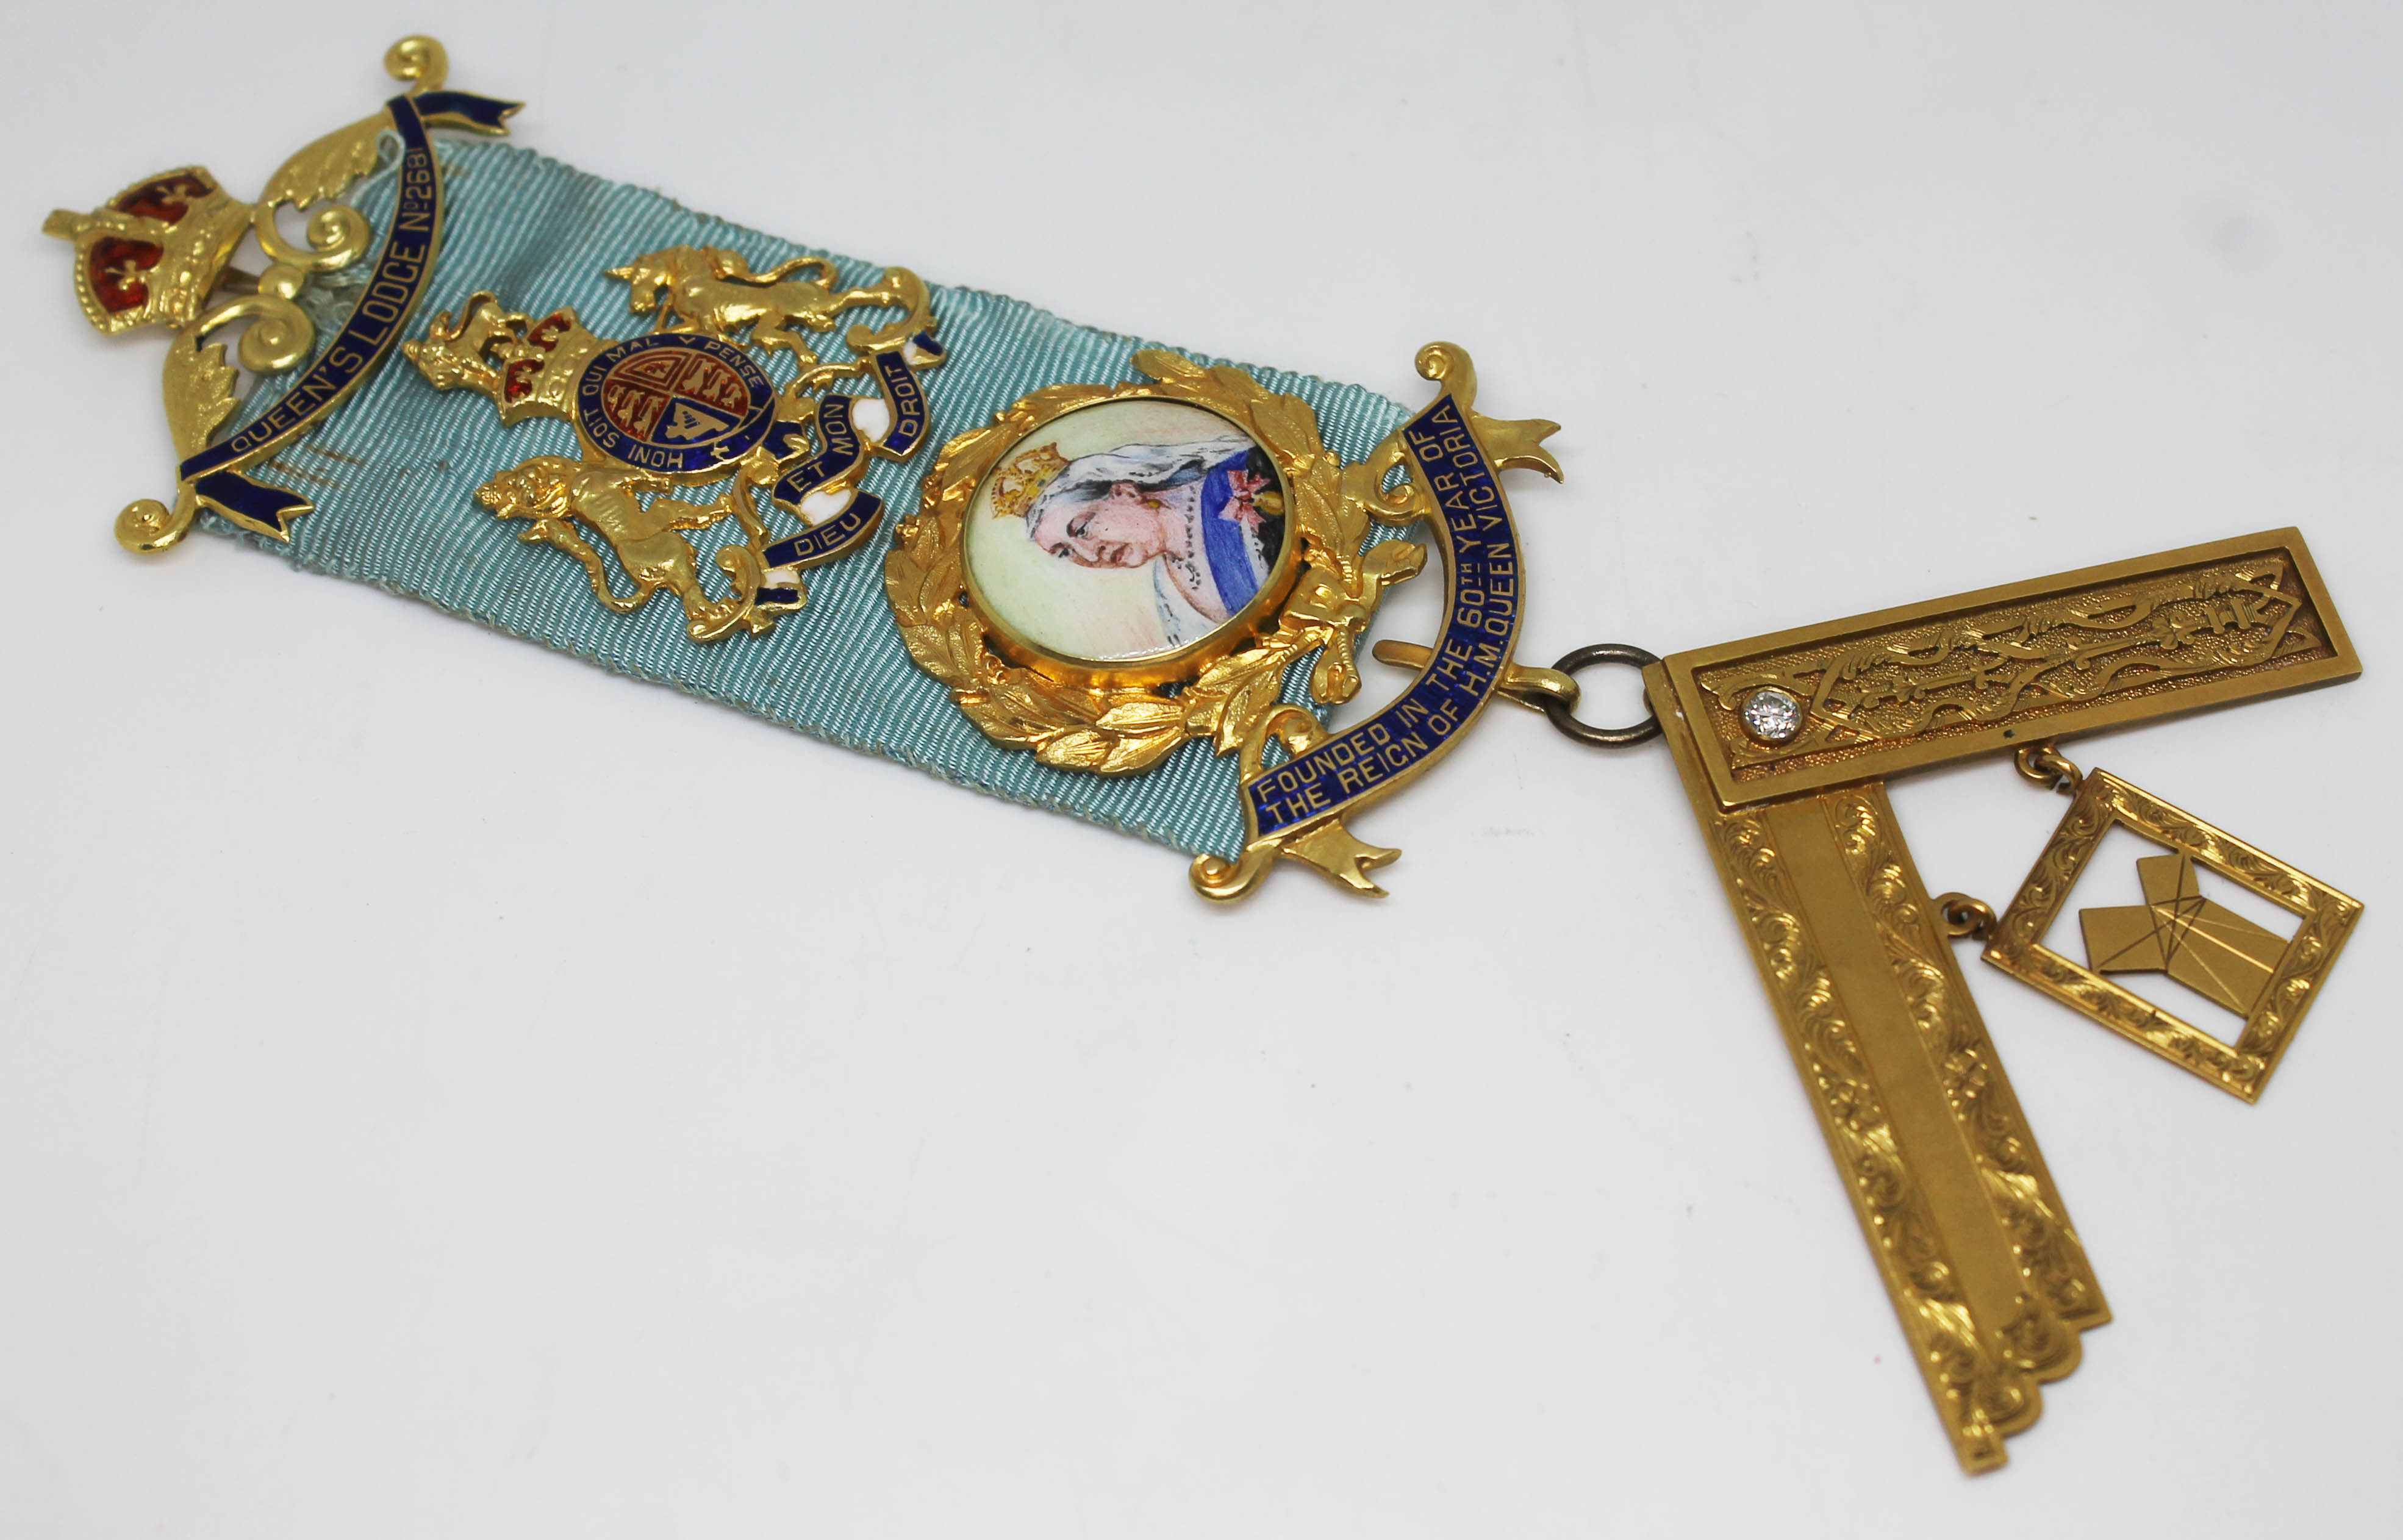 An 18ct gold Masonic jewel set with a diamond and a portrait miniature depicting Queen Victoria,